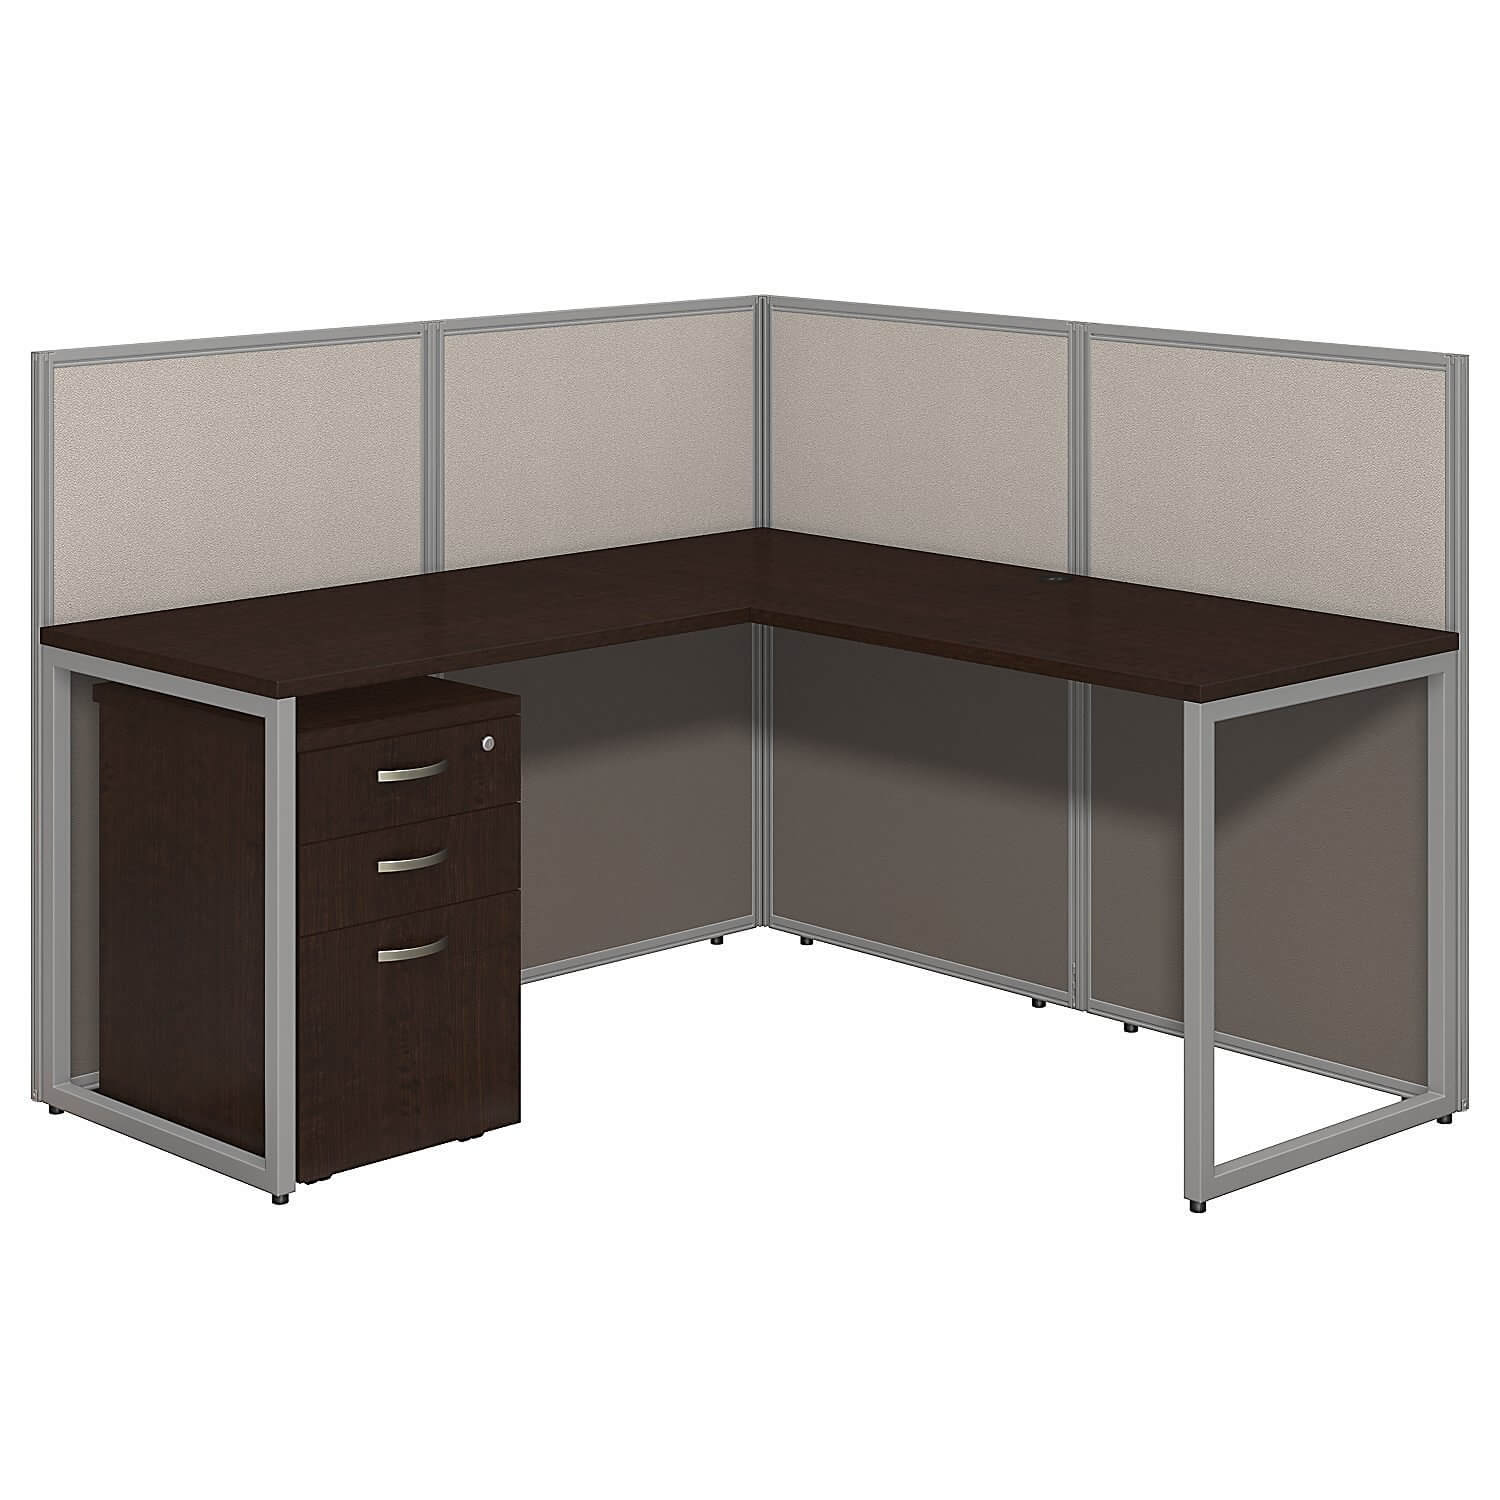 business-office-furniture-desk-with-panels-l-shape-cubicle-workstation-with-storage-60x60.jpg